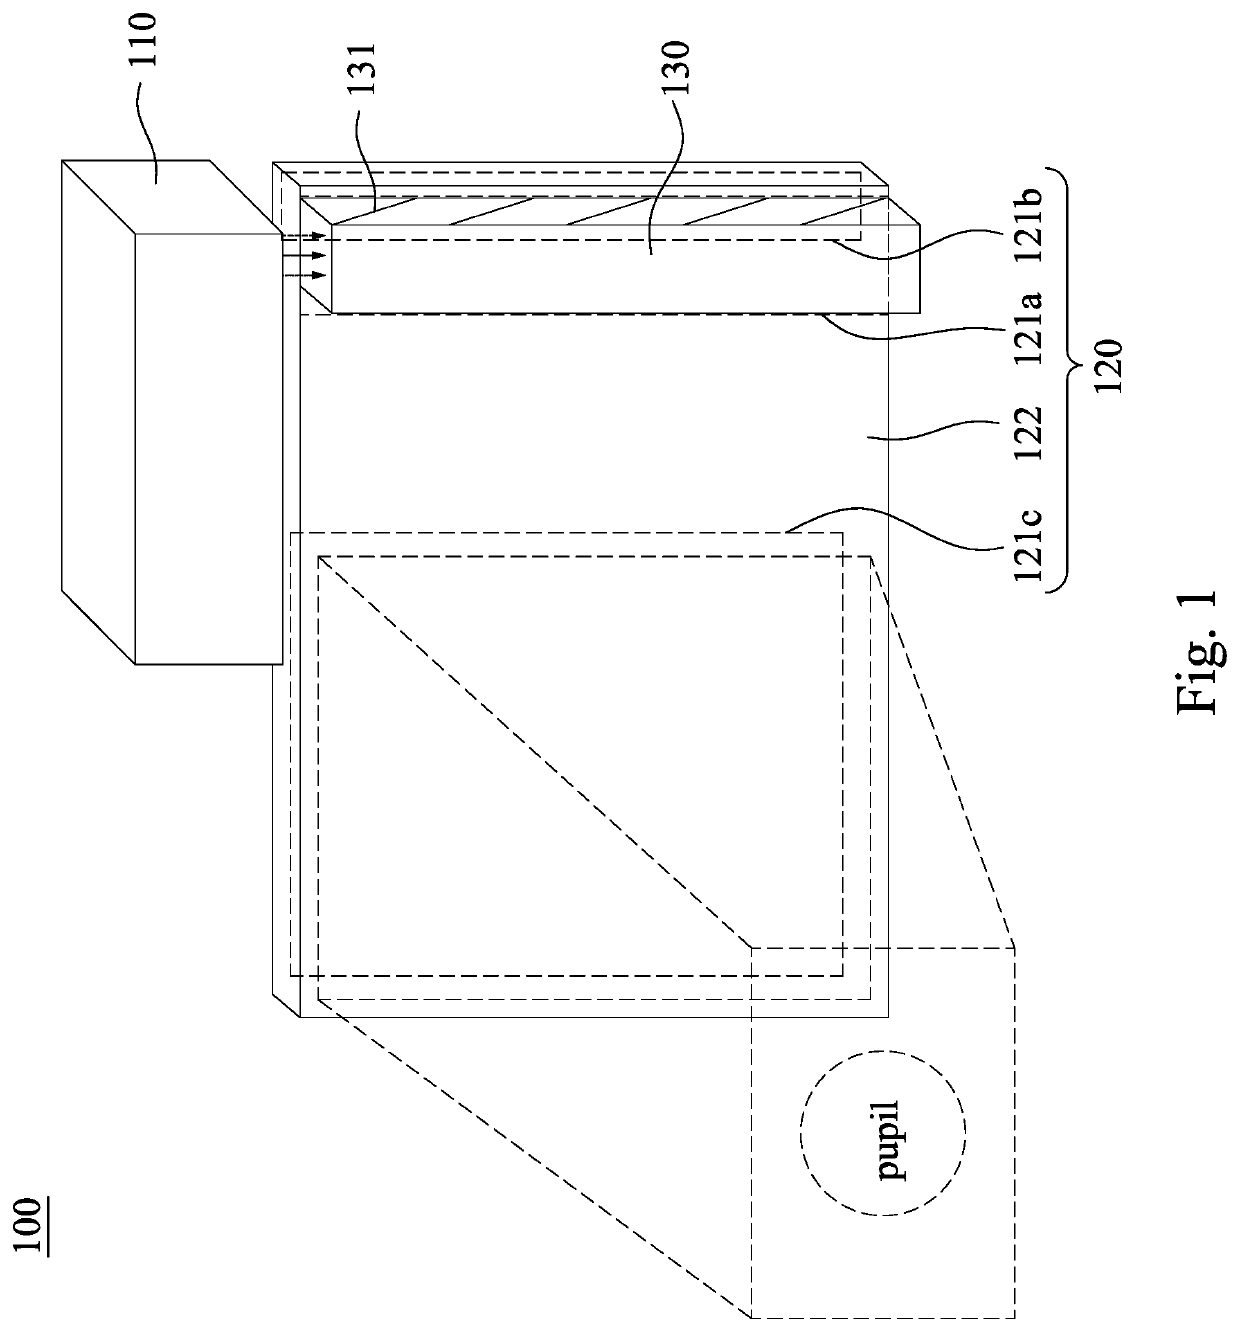 Waveguide device and optical engine